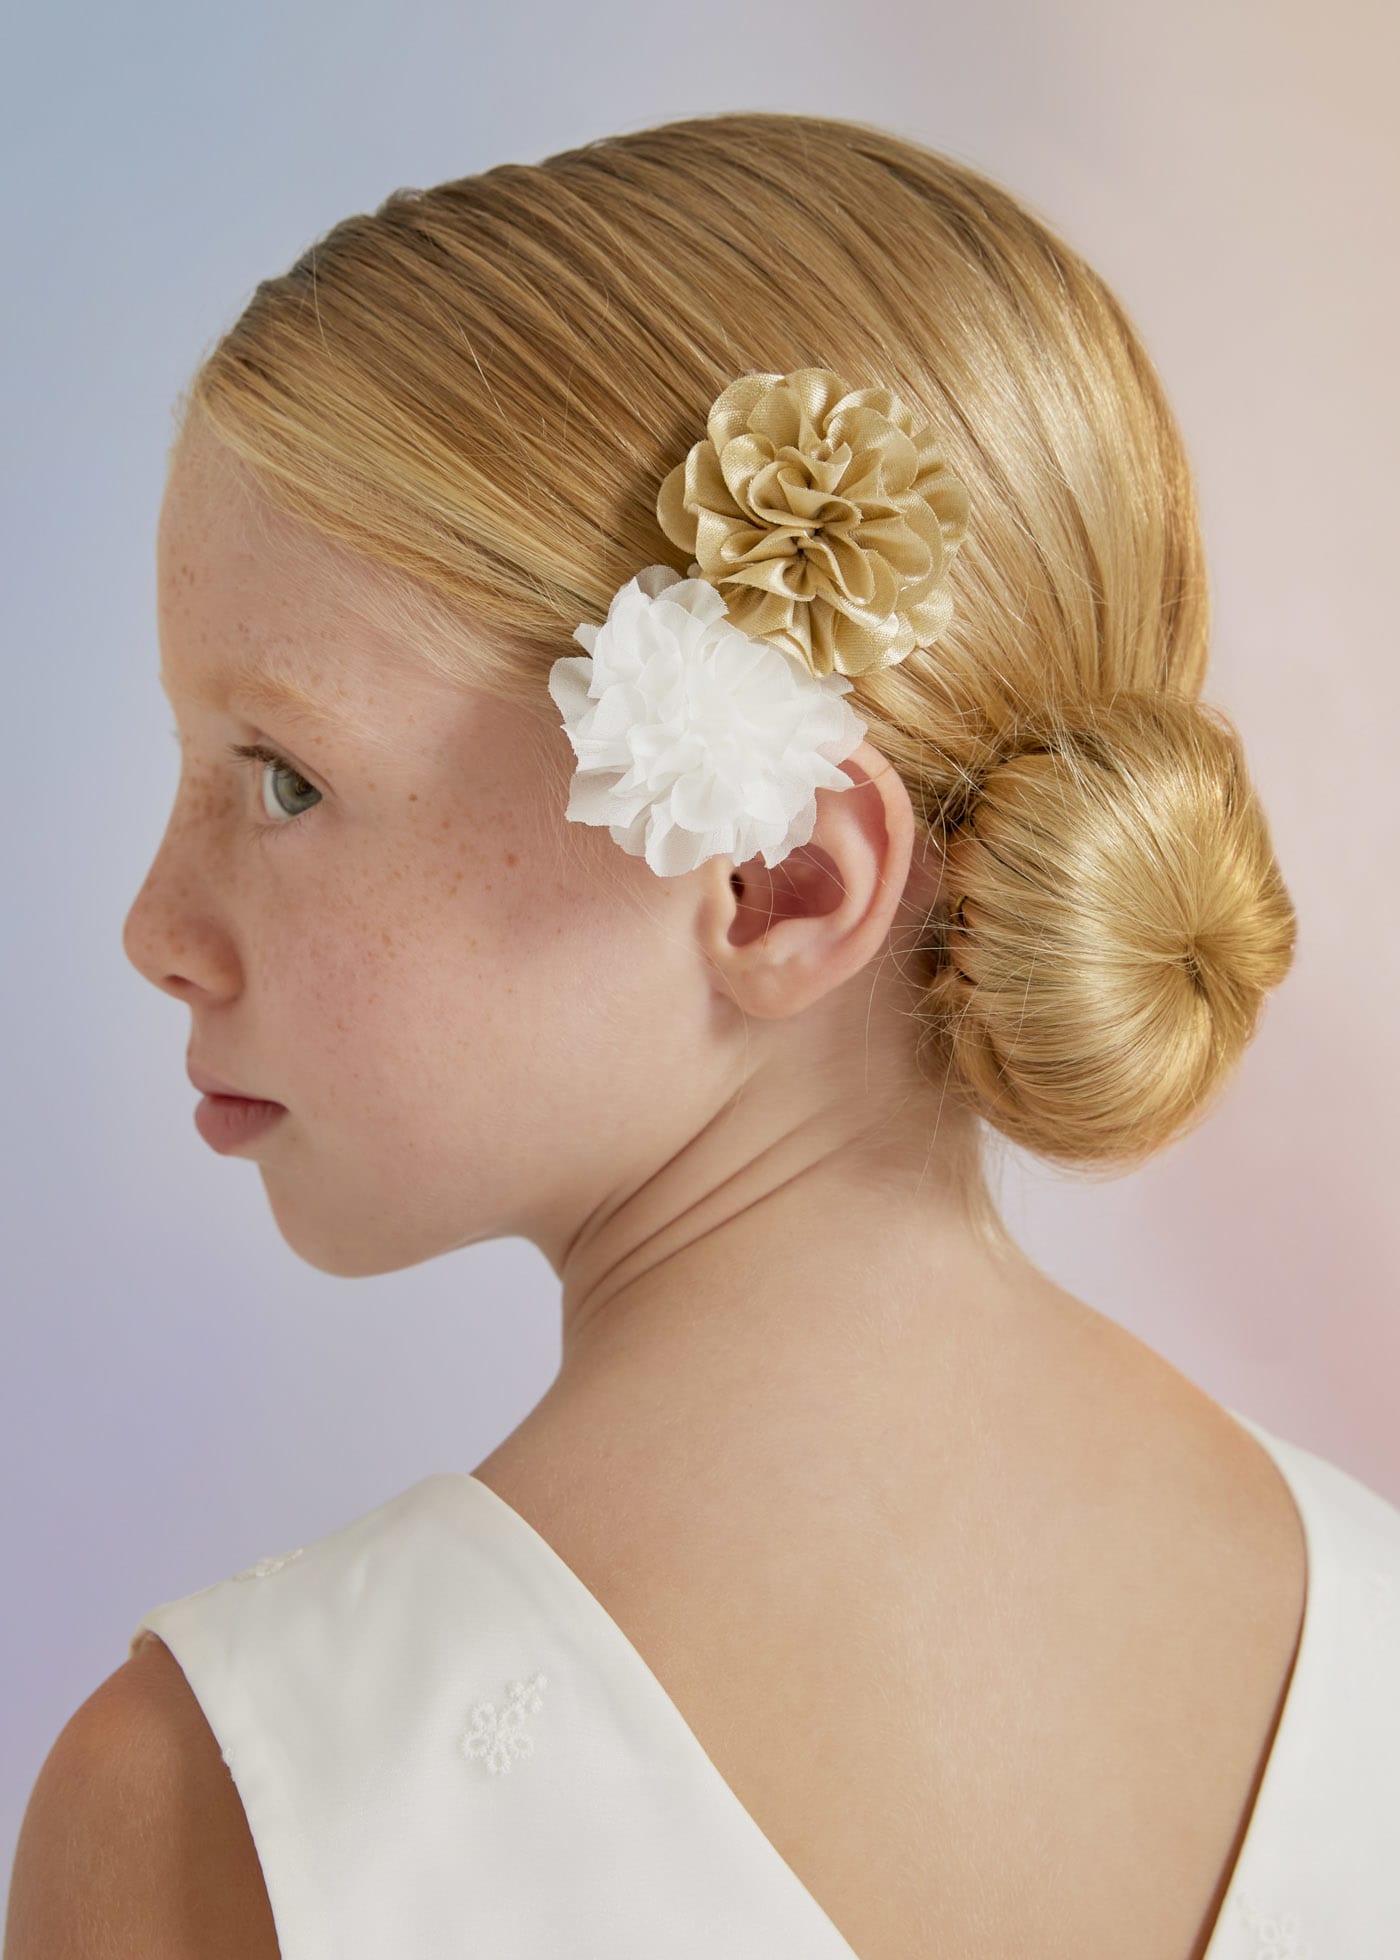 Combined flower clip girl